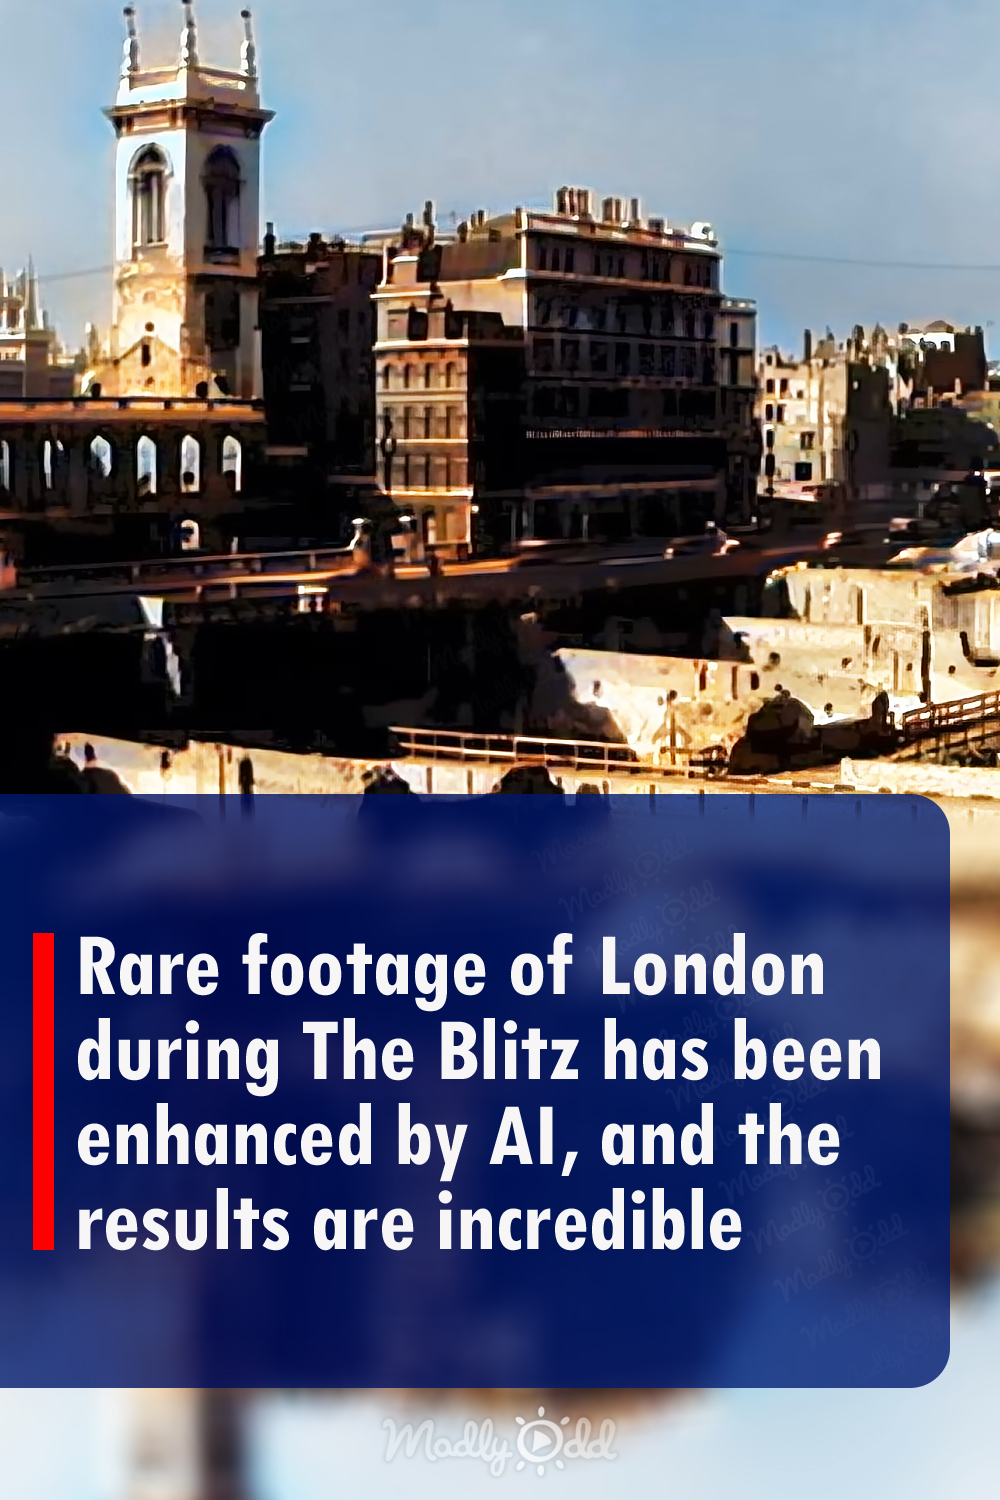 Rare footage of London during The Blitz has been enhanced by AI, and the results are incredible